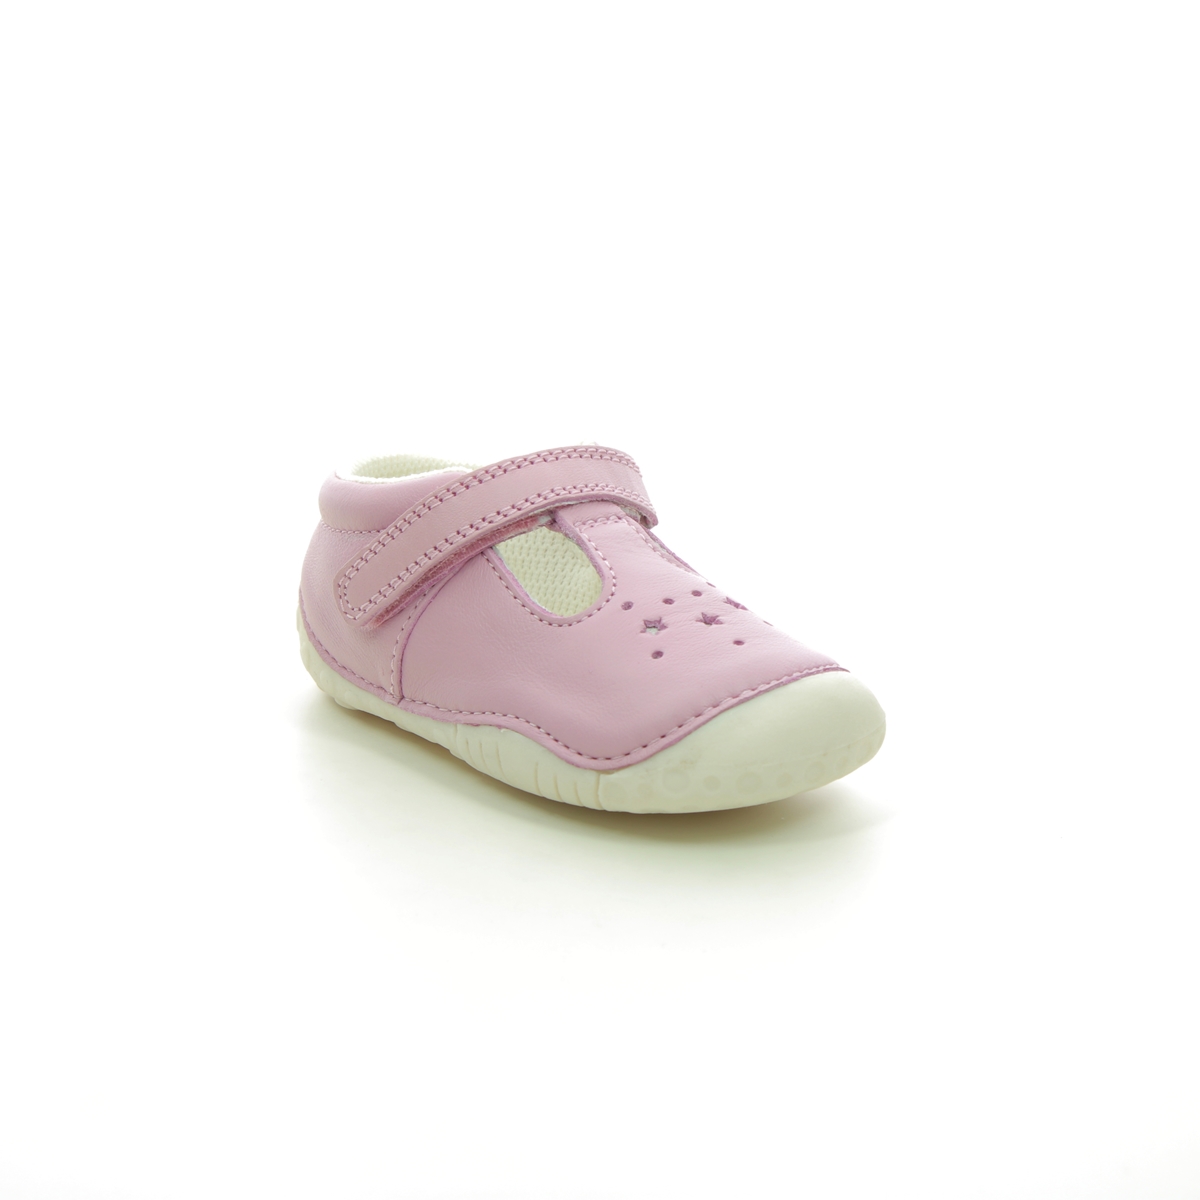 Start Rite - Tumble T Bar In Pink Leather 0761-67G In Size 2 In Plain Pink Leather First And Baby Shoes  In Pink Leather For kids